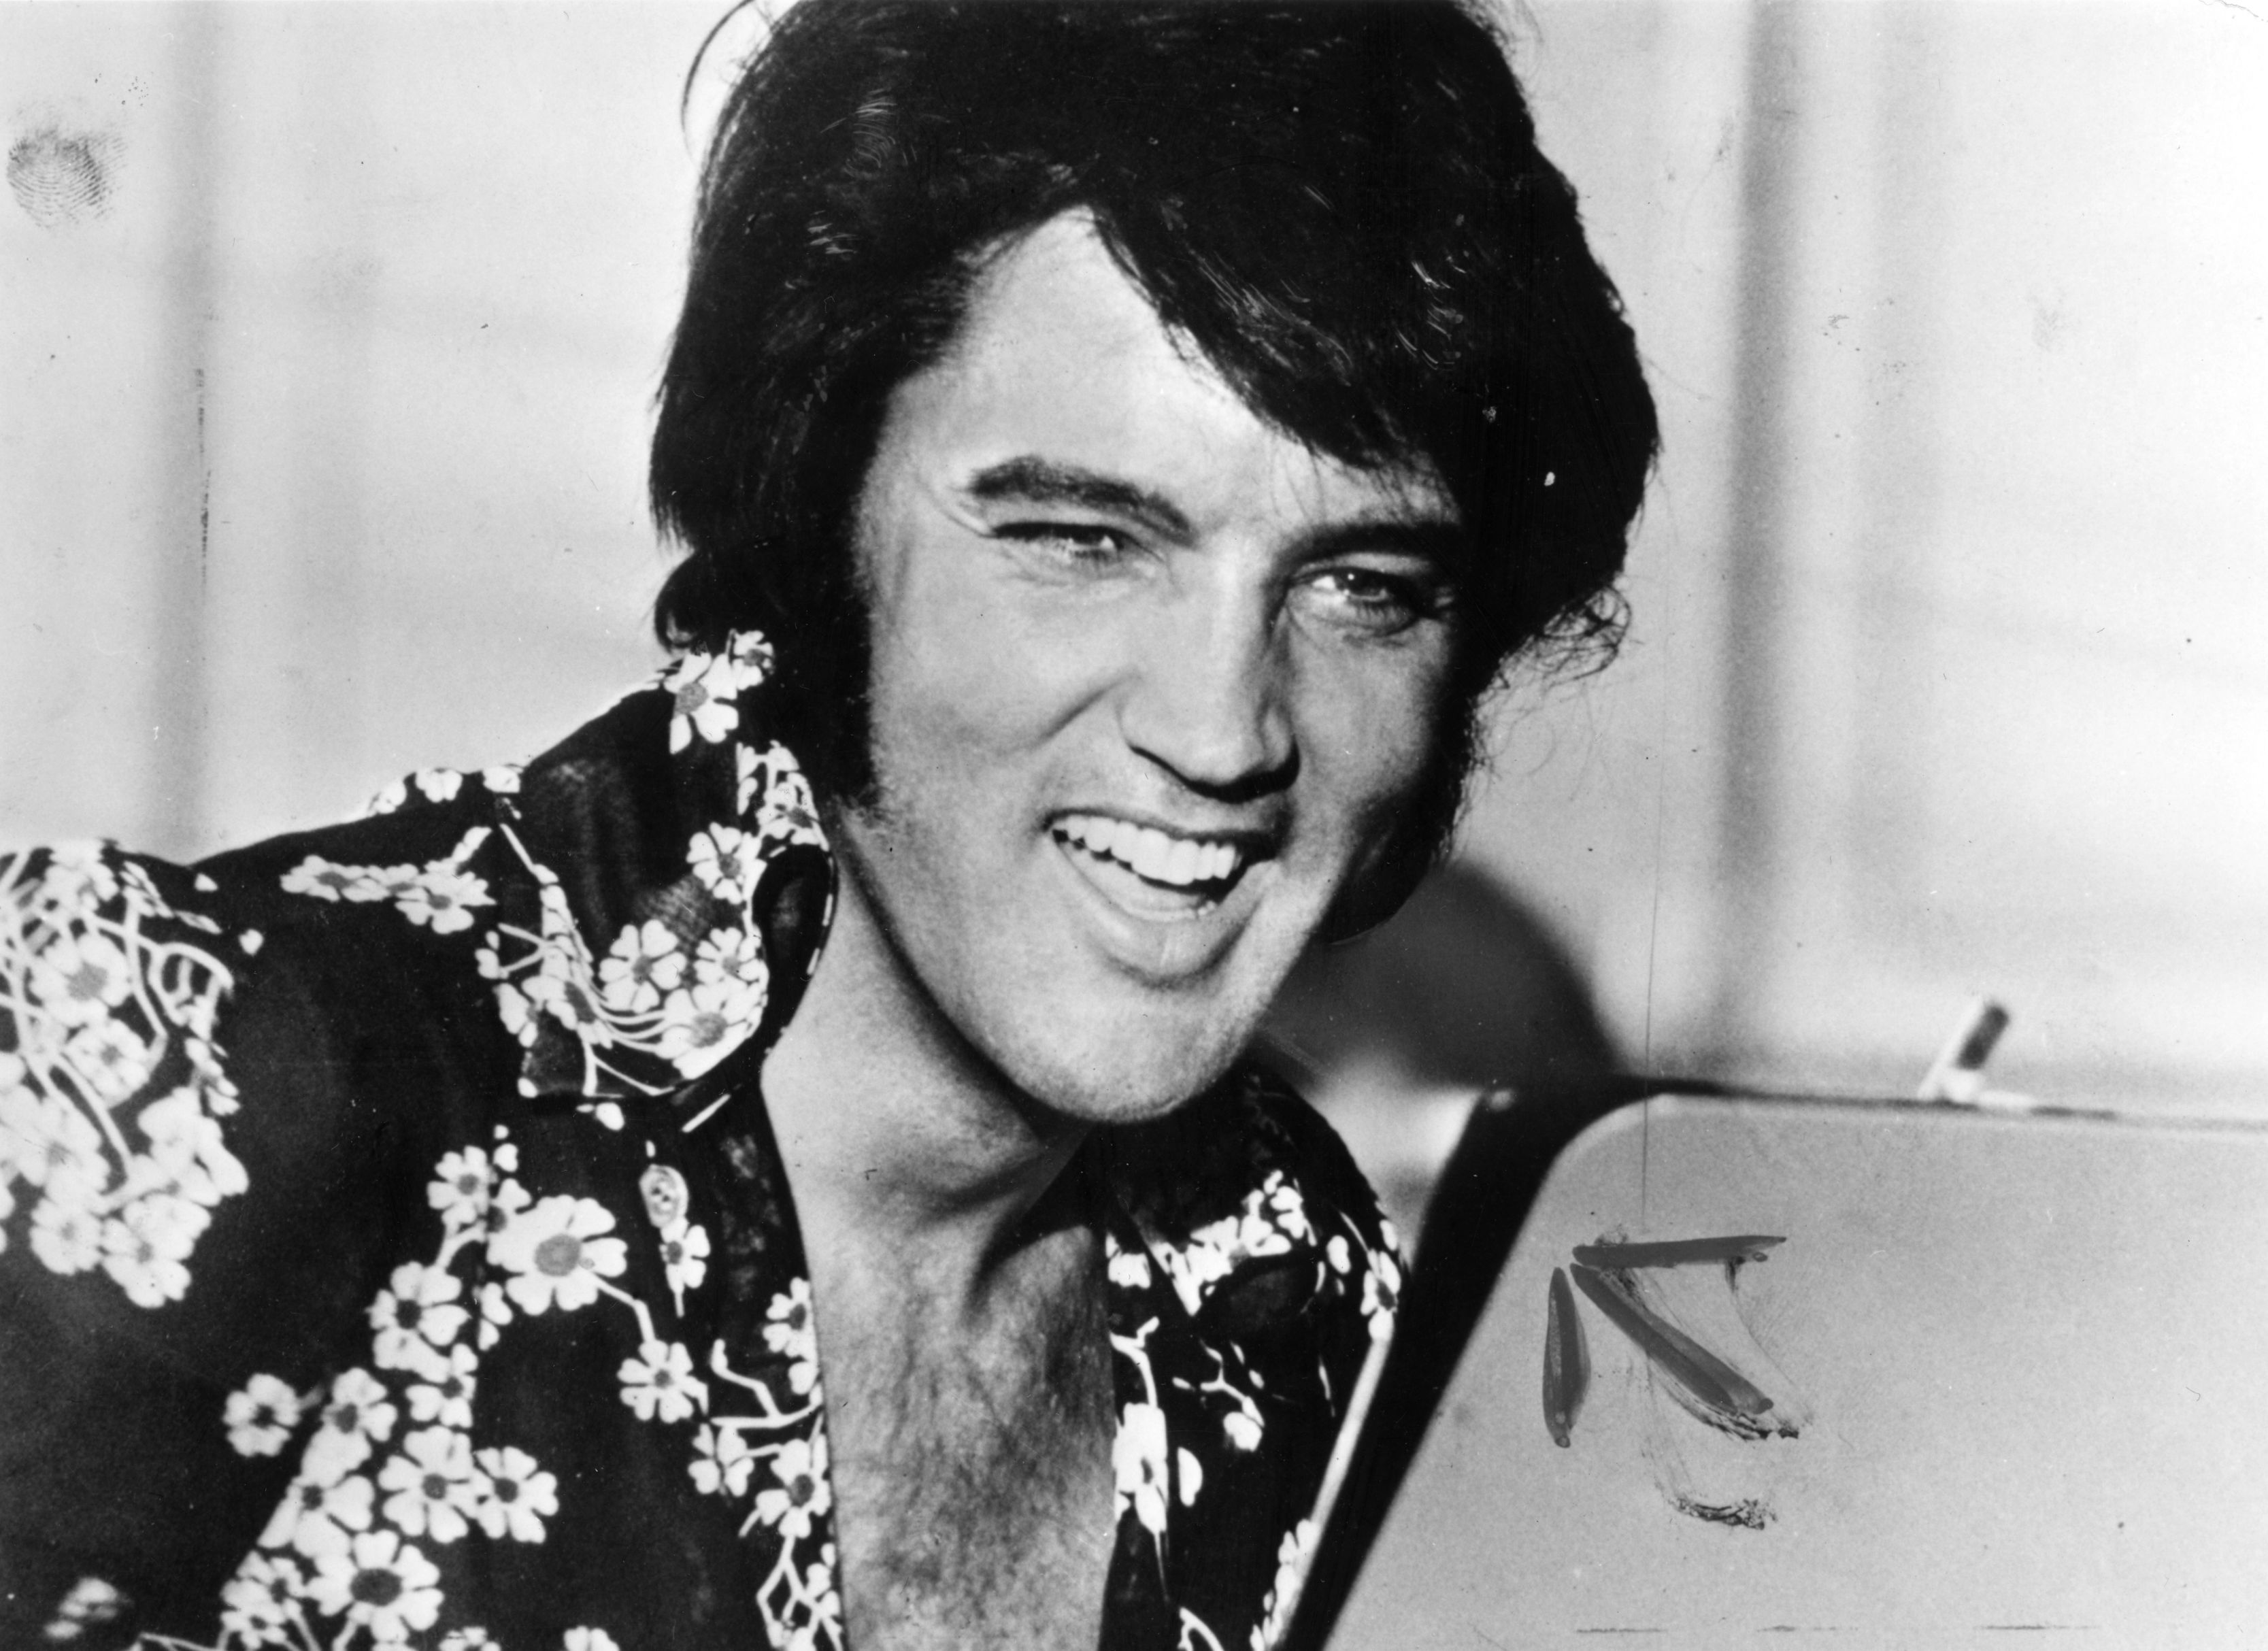 Elvis Presley laughing while posing in a black-and-white image circa 1975. | Source: Keystone/Getty Images